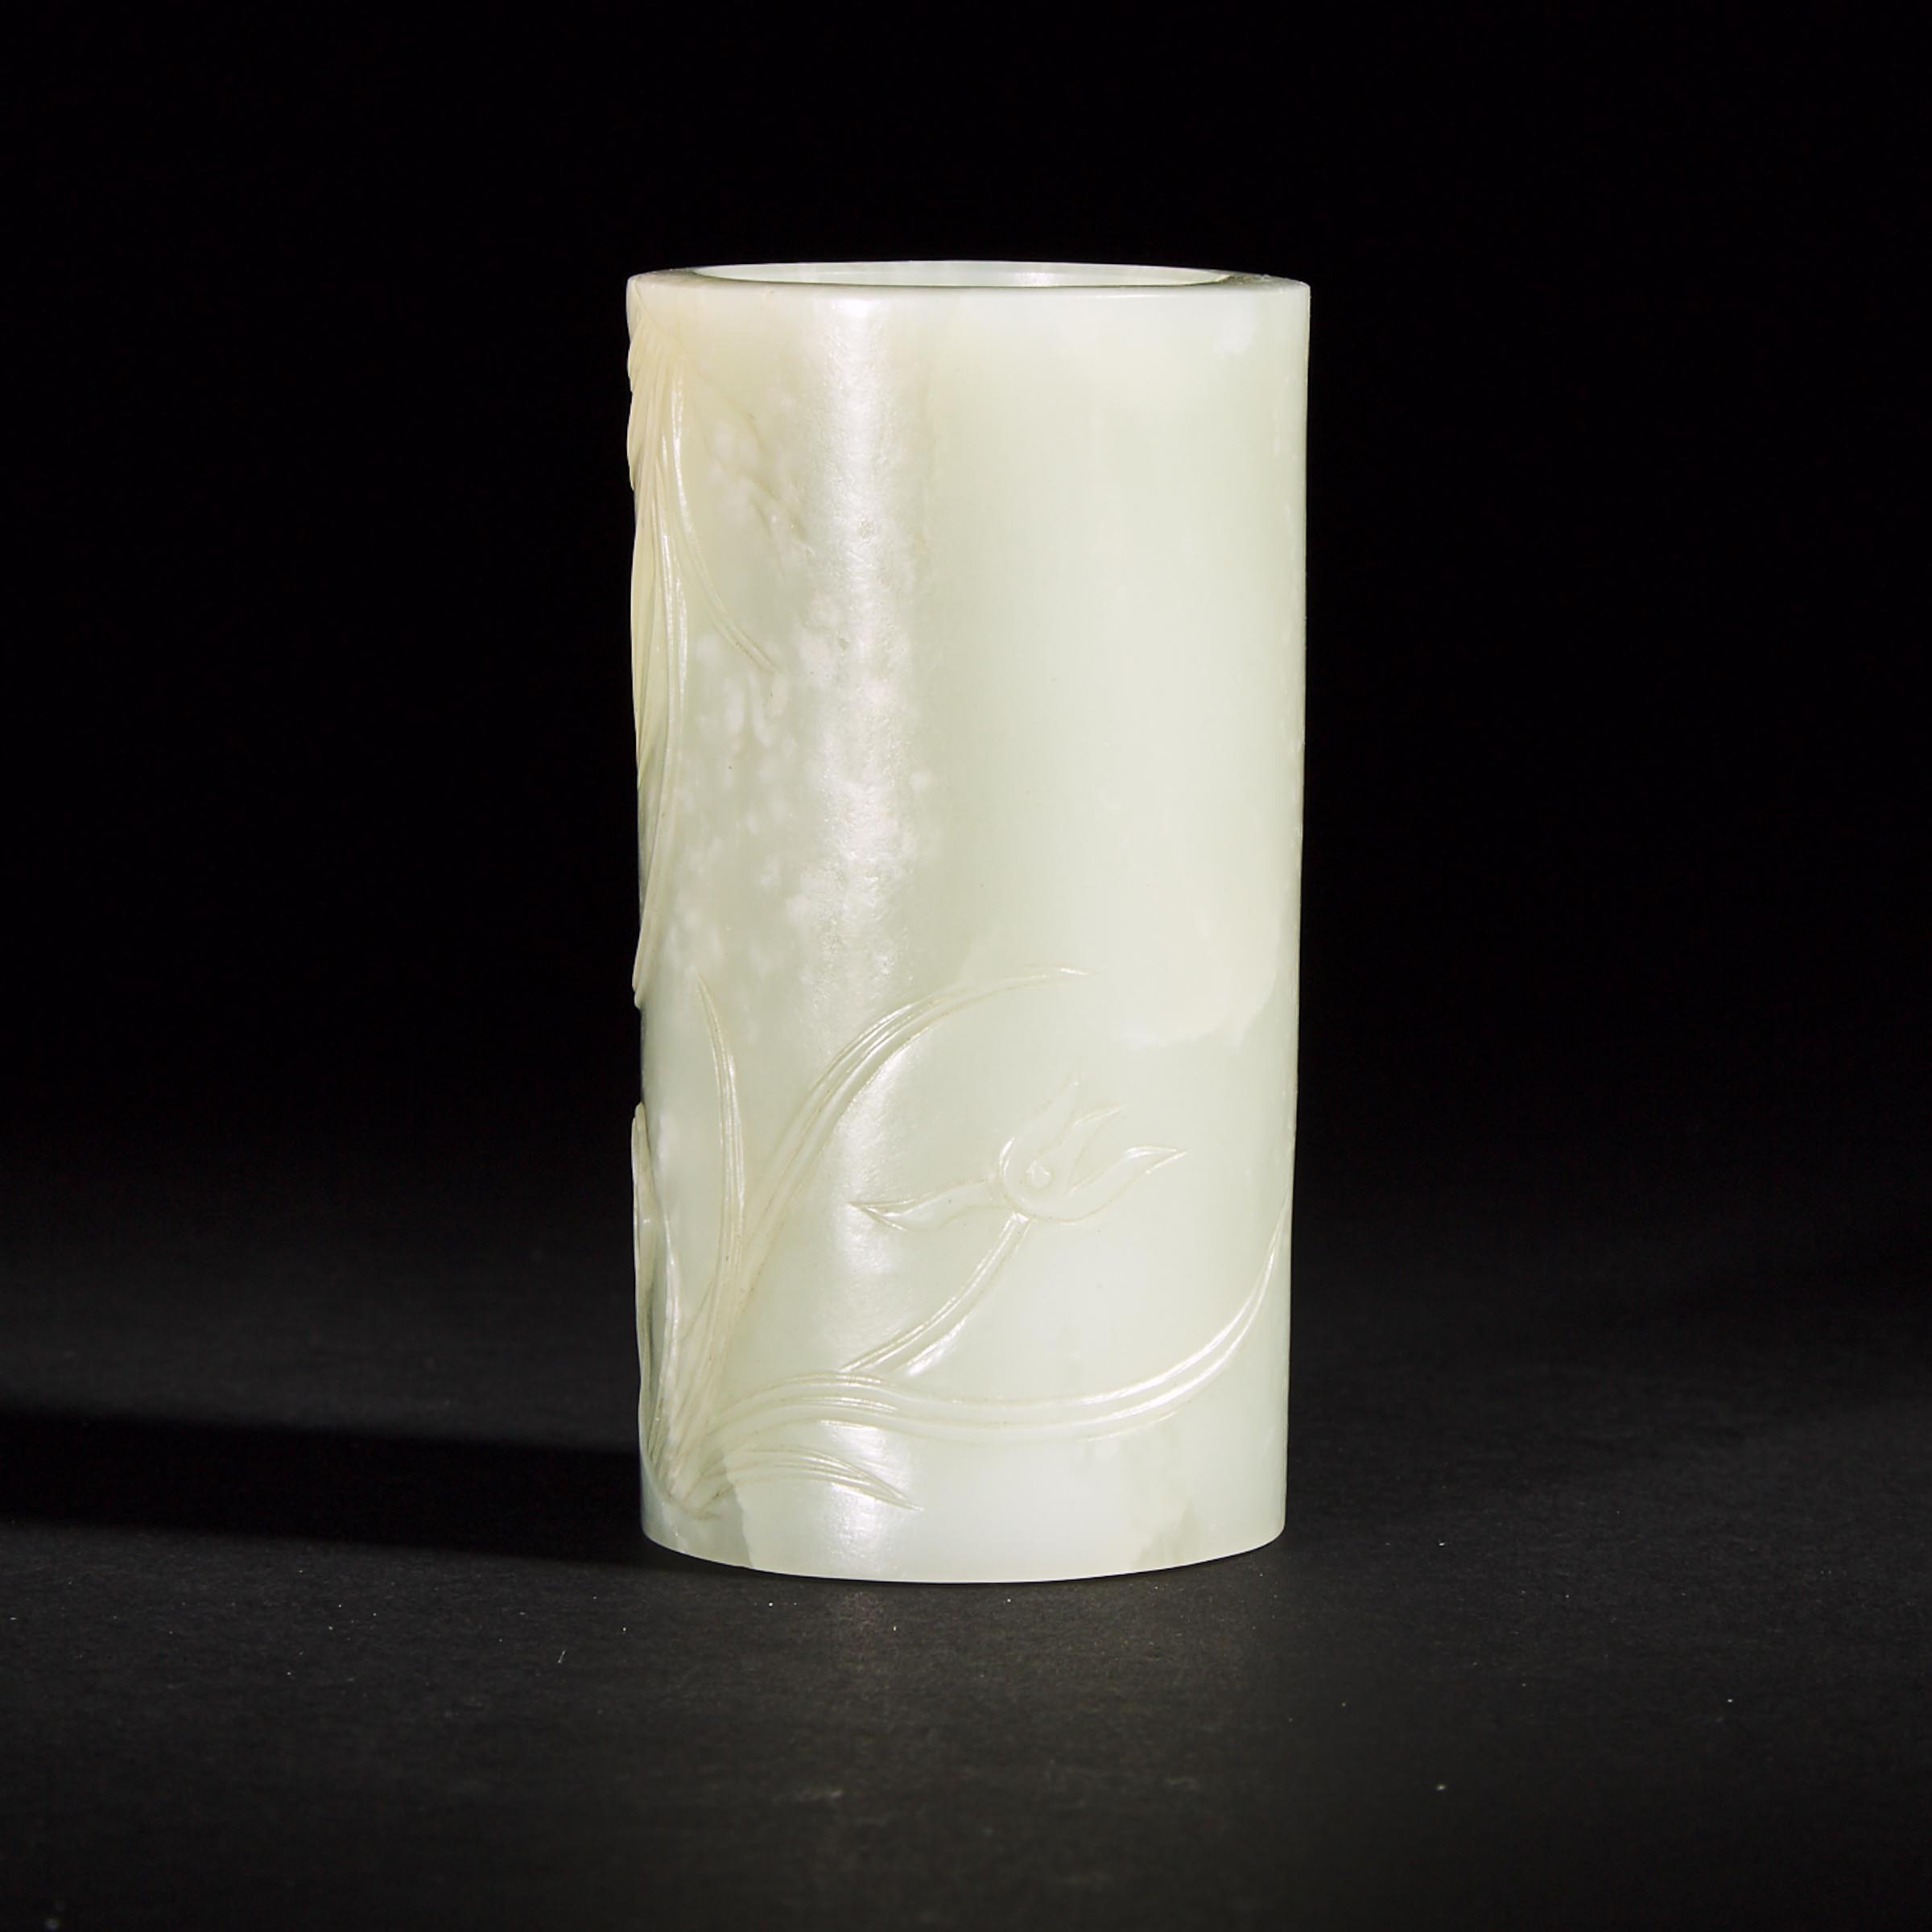 A Finely Carved White Jade Brush Pot, Qing Dynasty, 19th Century